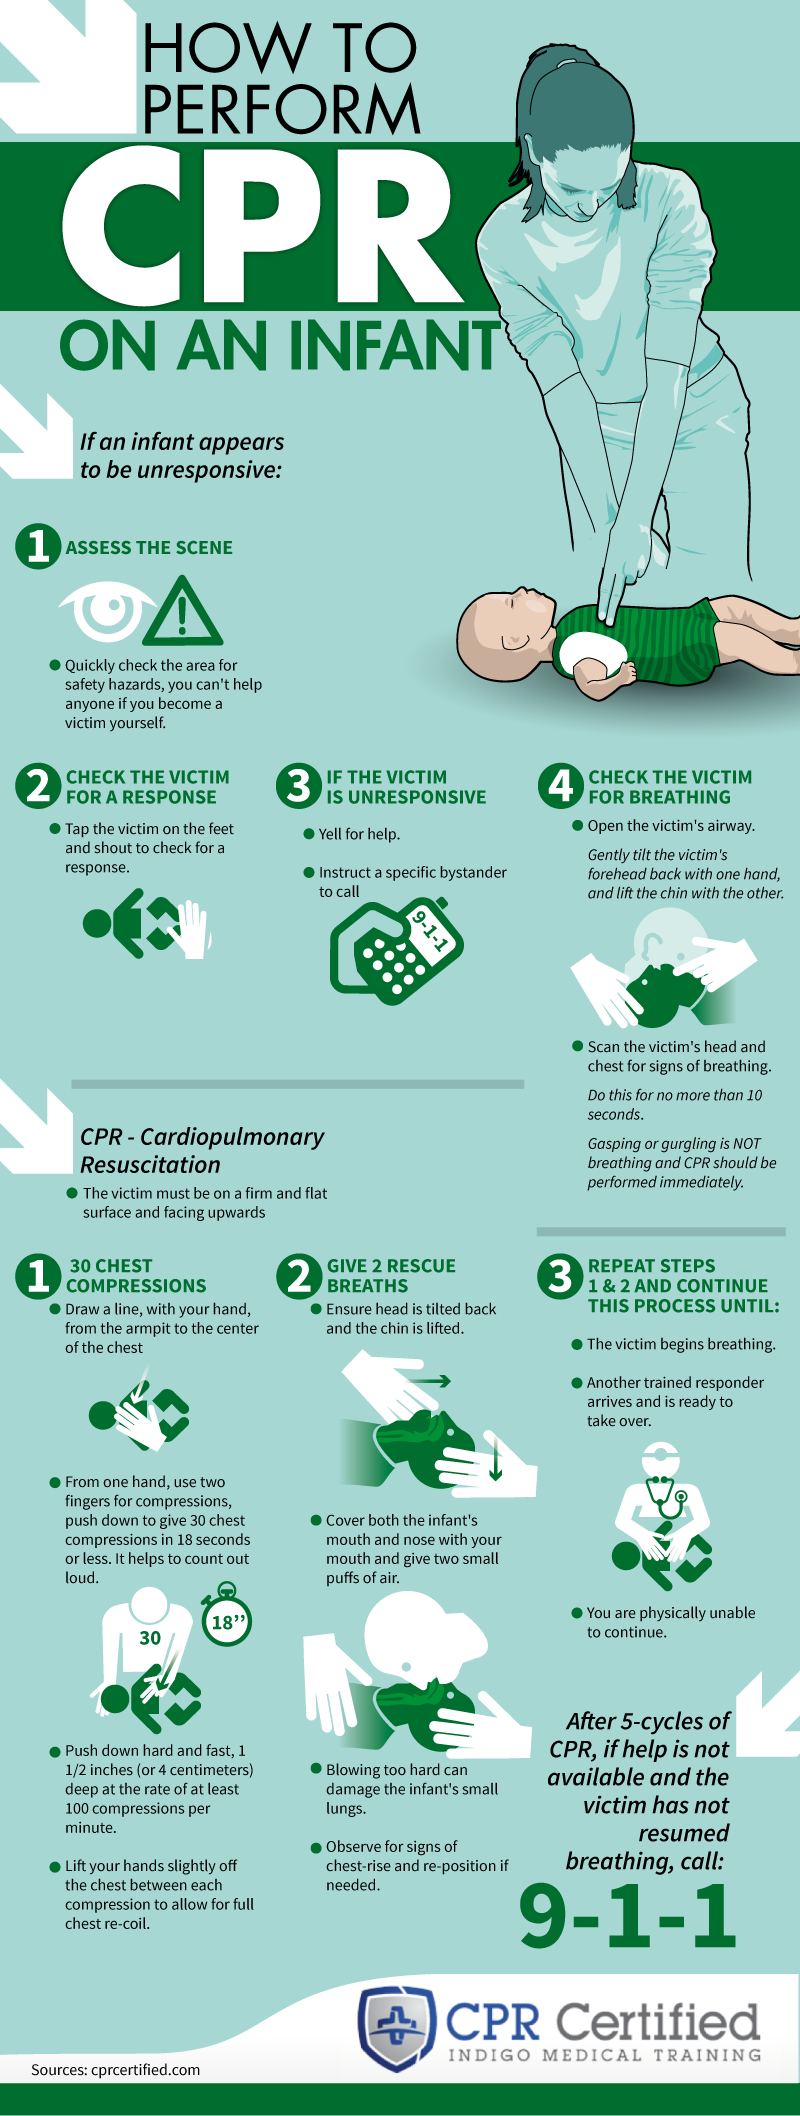 How to Perform CPR on an Infant – Infographic